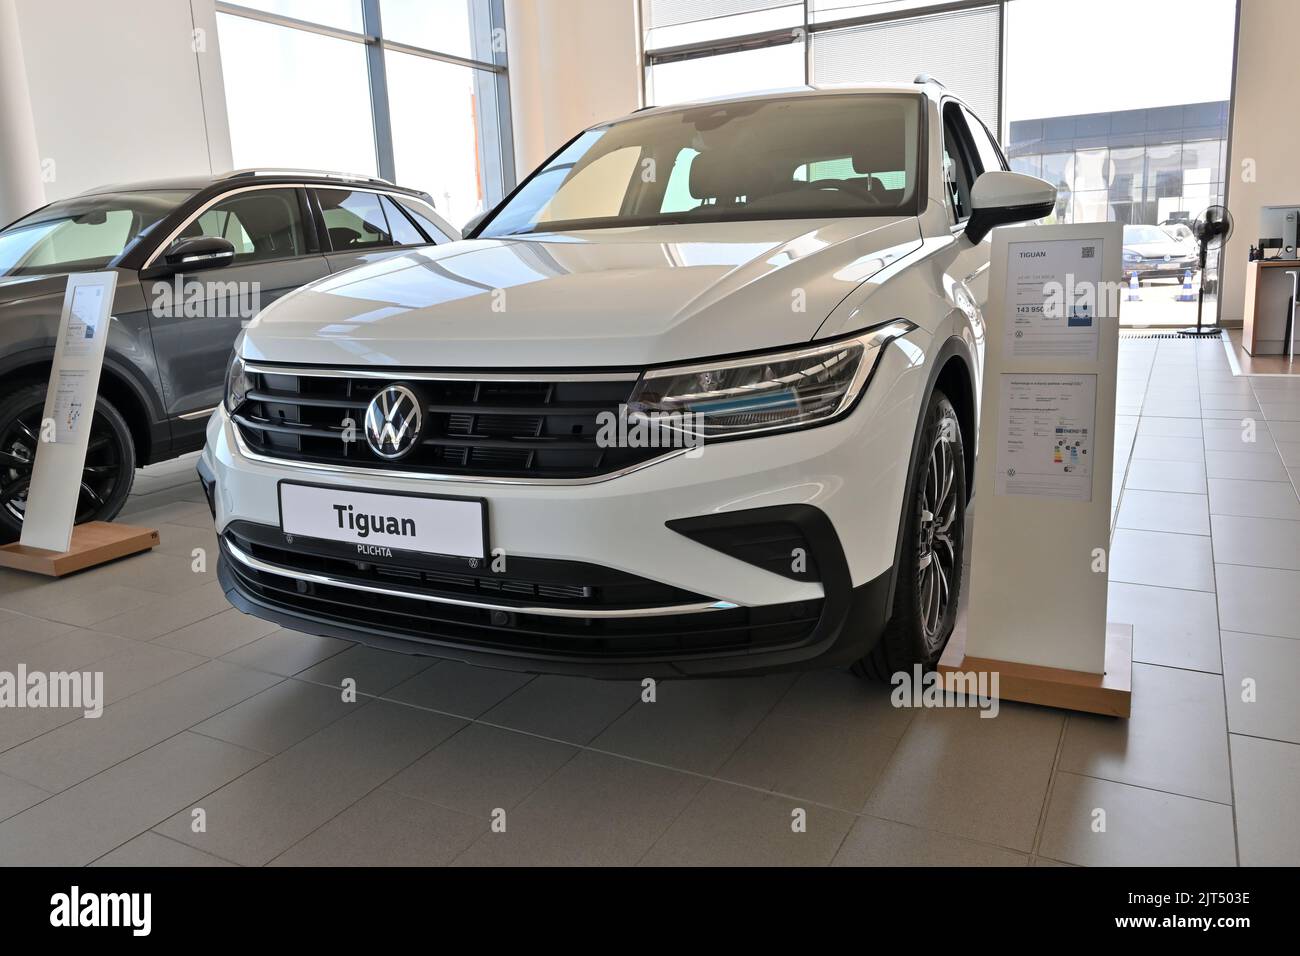 Gdansk, Poland - August 27, 2022: New model of Volkswagen Tiguan presented in the car showroom of Gdansk Stock Photo